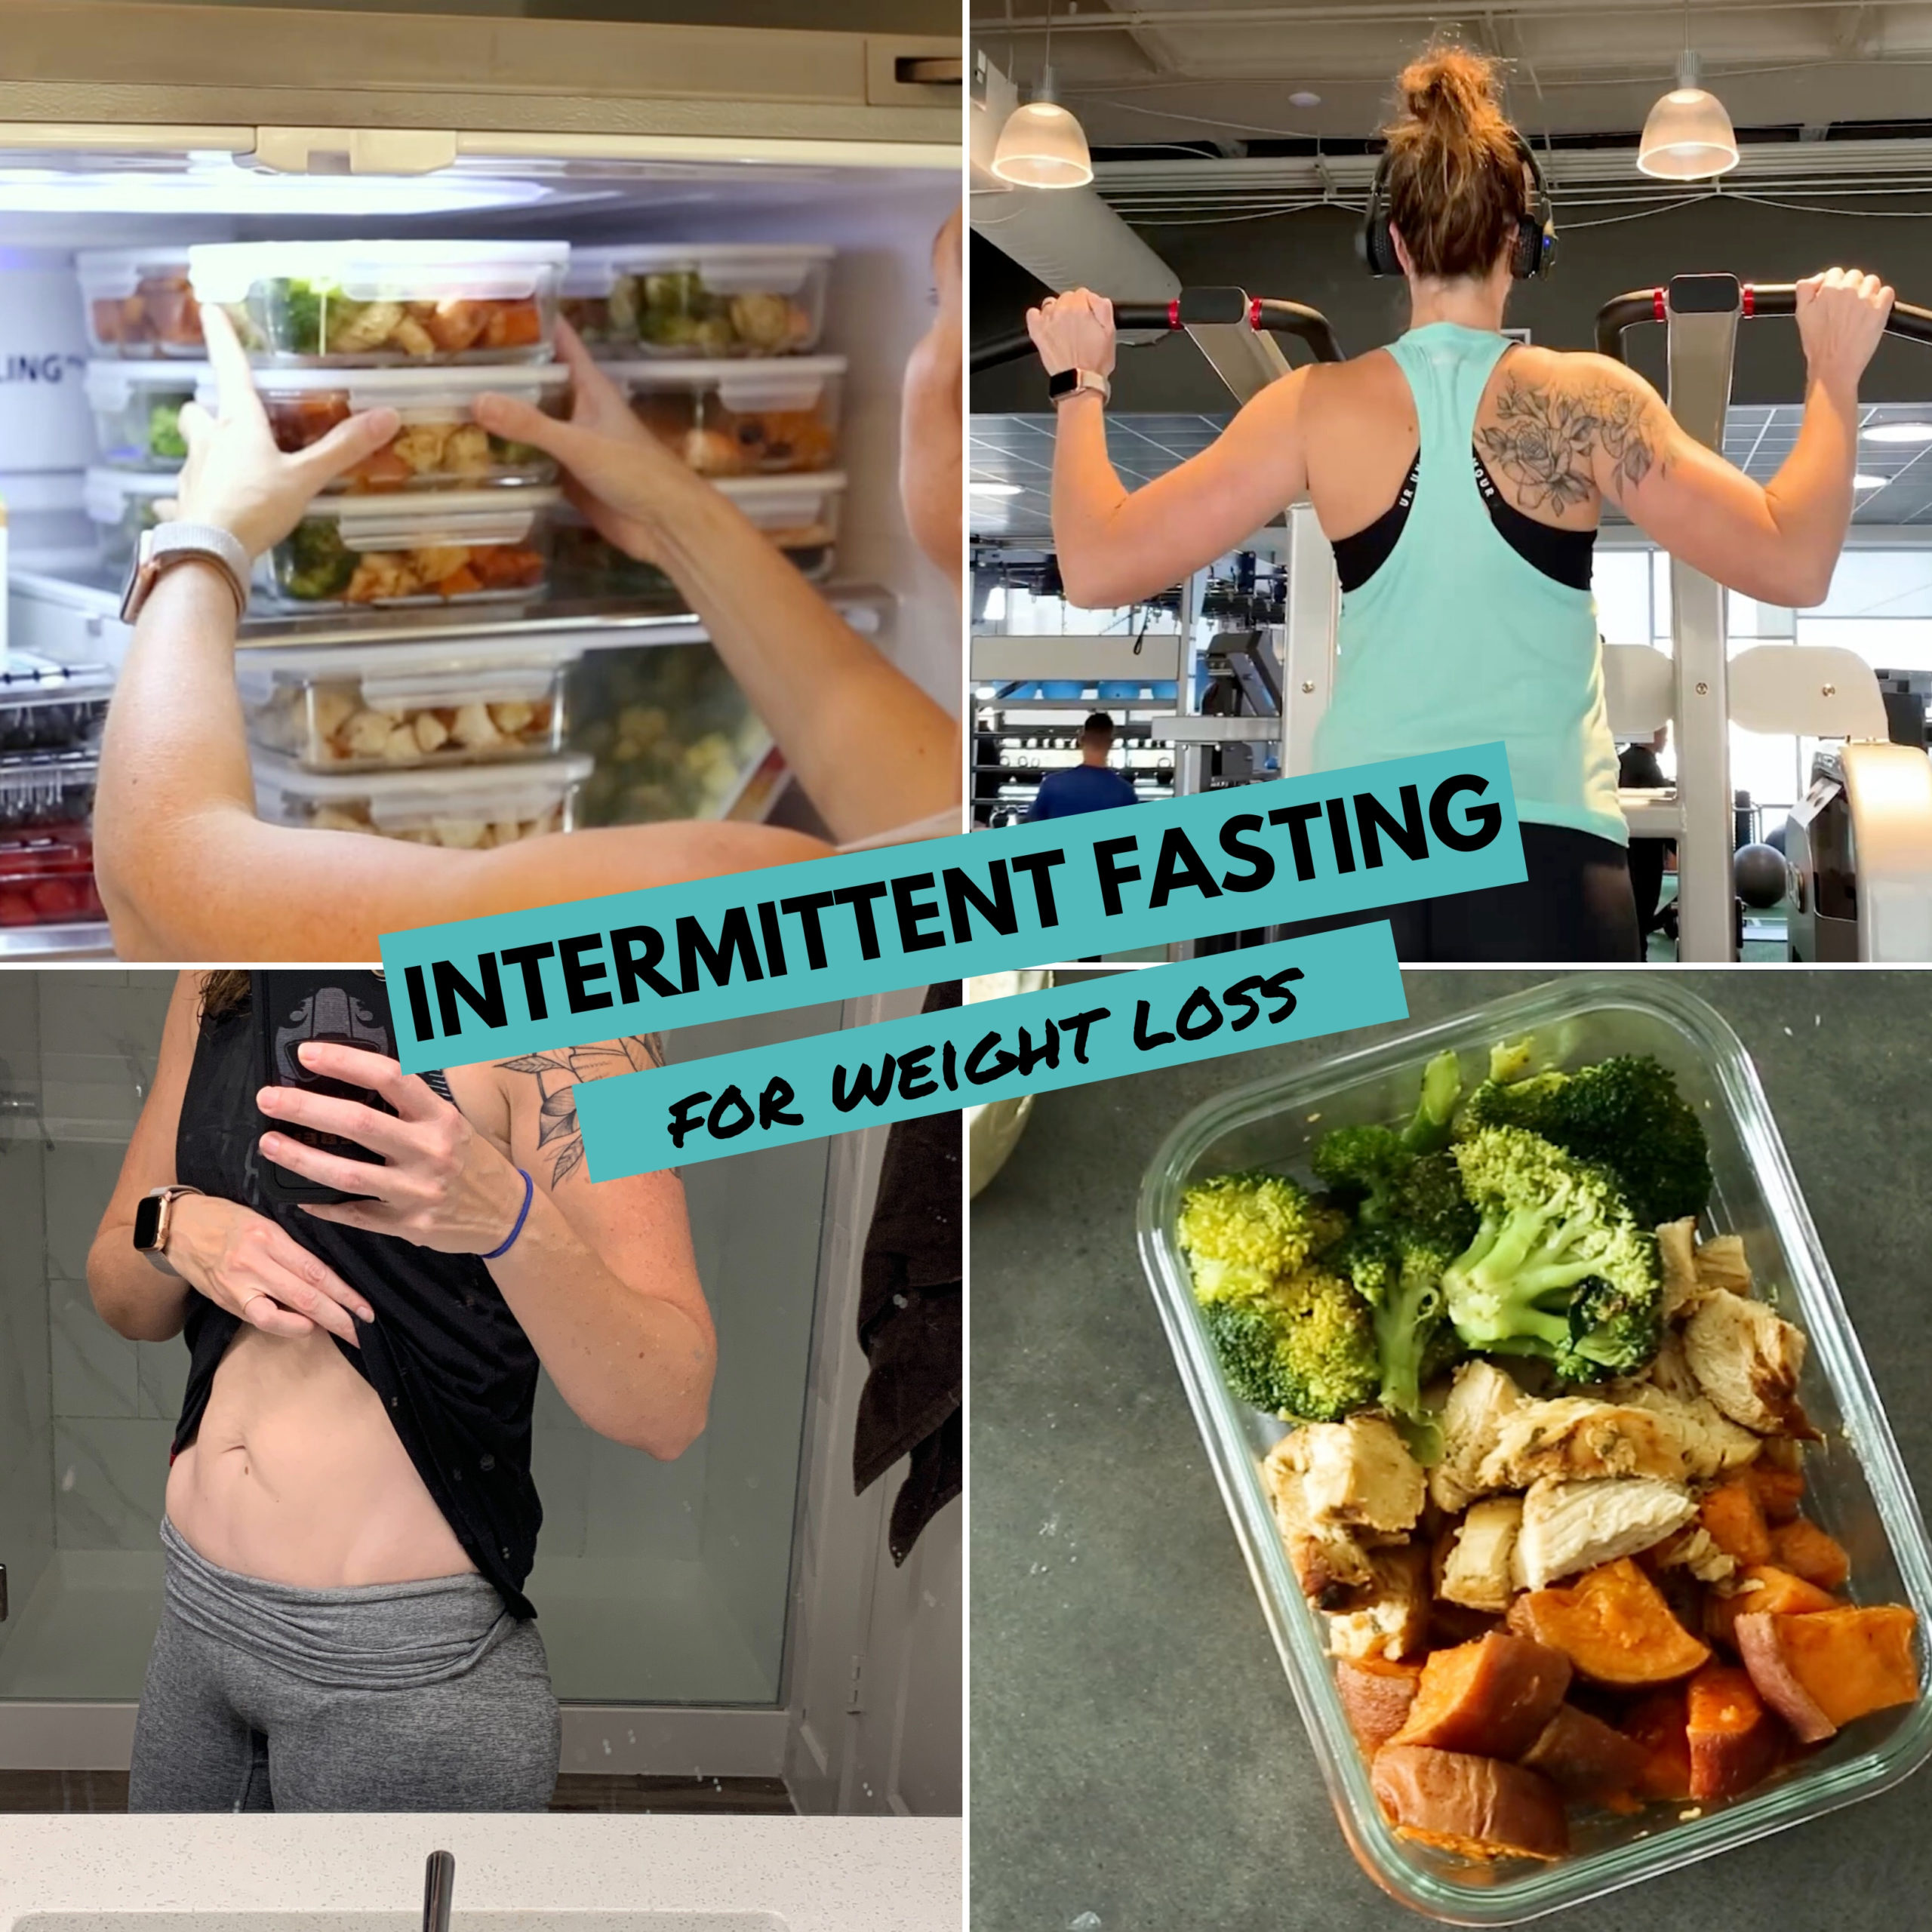 Does Intermittent Fasting Work For Weight Loss? Beginner's Guide To Intermittent Fasting